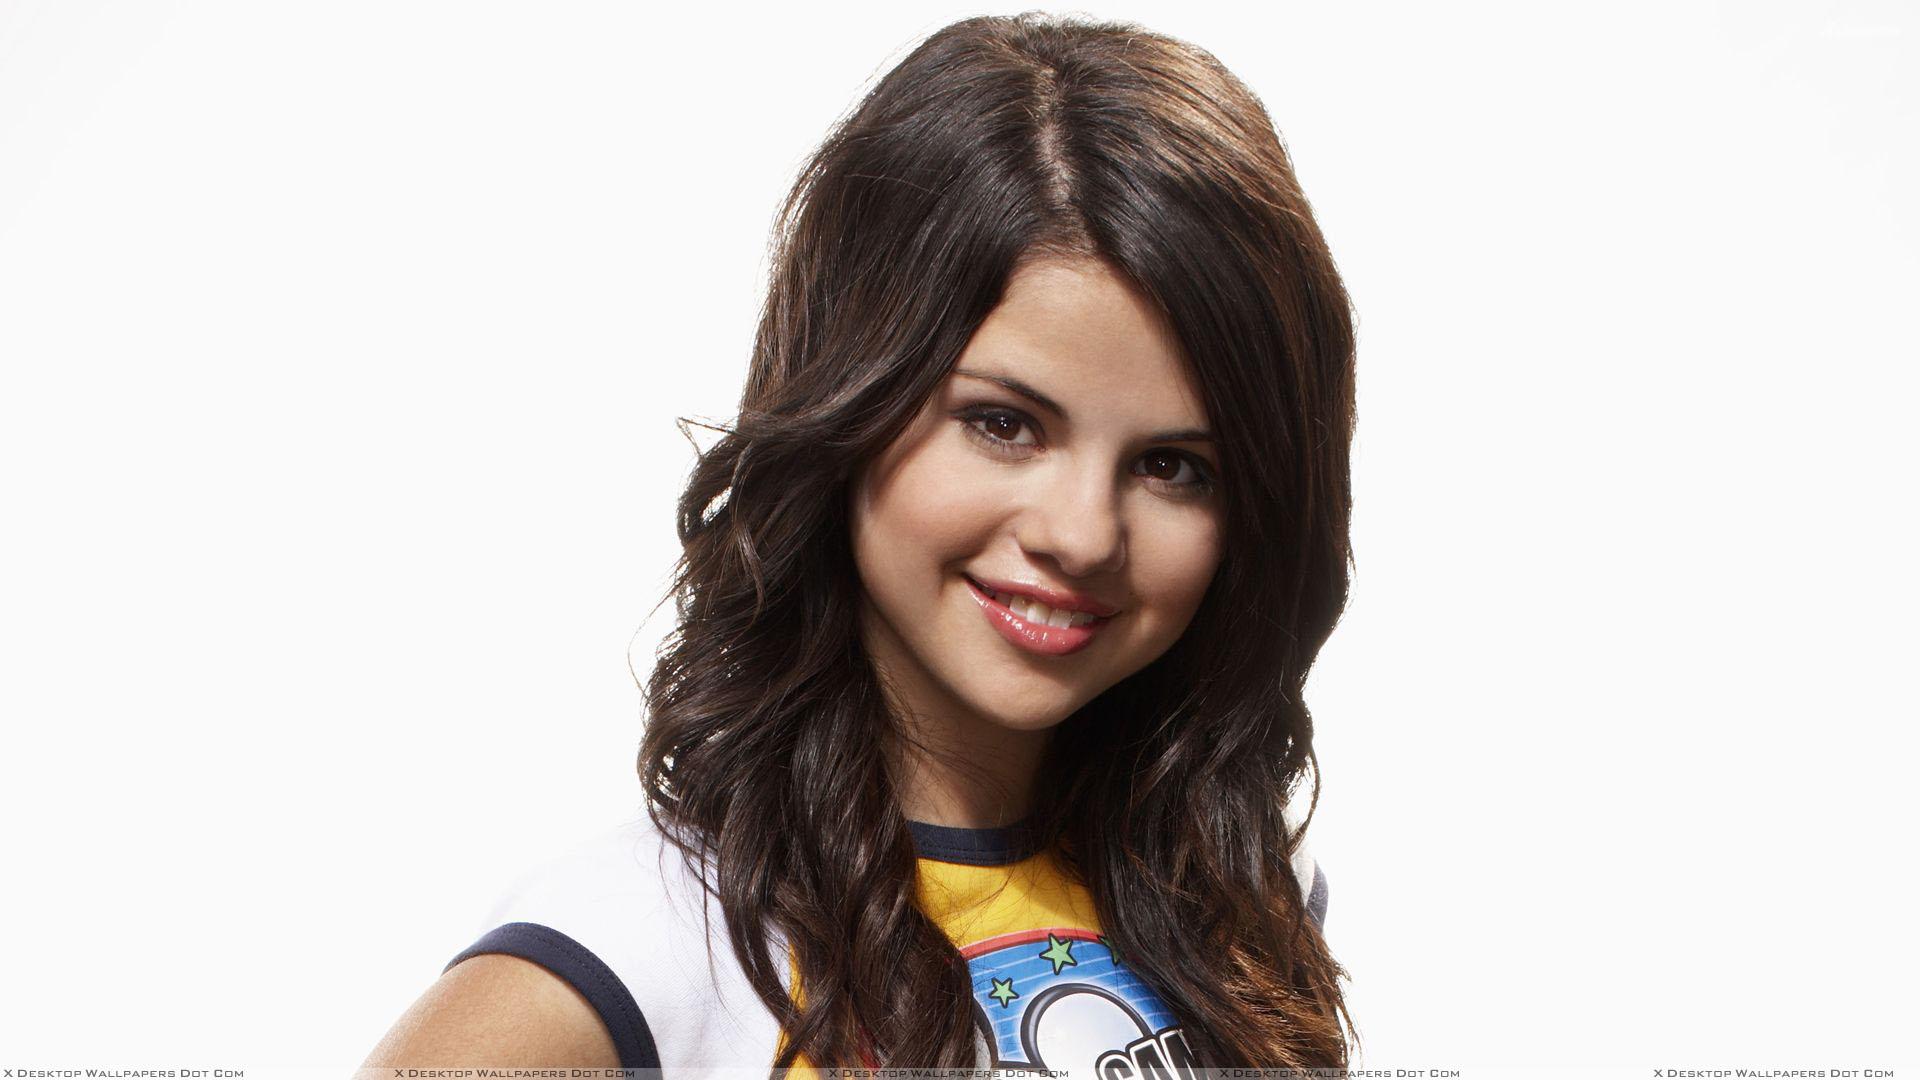 Selena Gomez Cute Smiling Face In White T Shirt And White Background